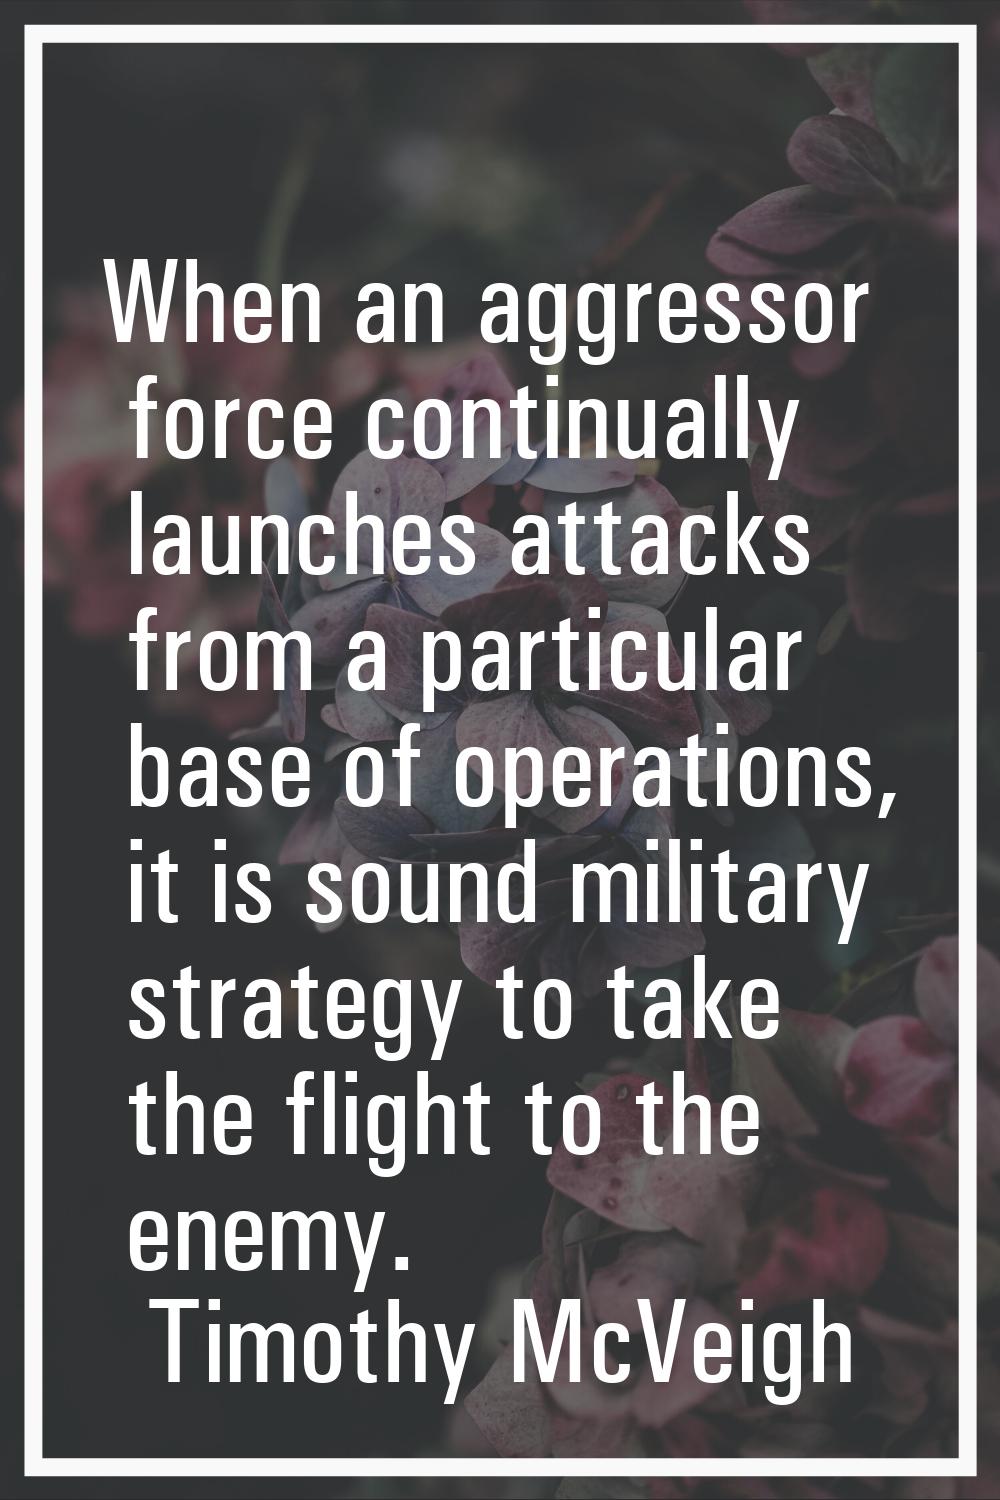 When an aggressor force continually launches attacks from a particular base of operations, it is so